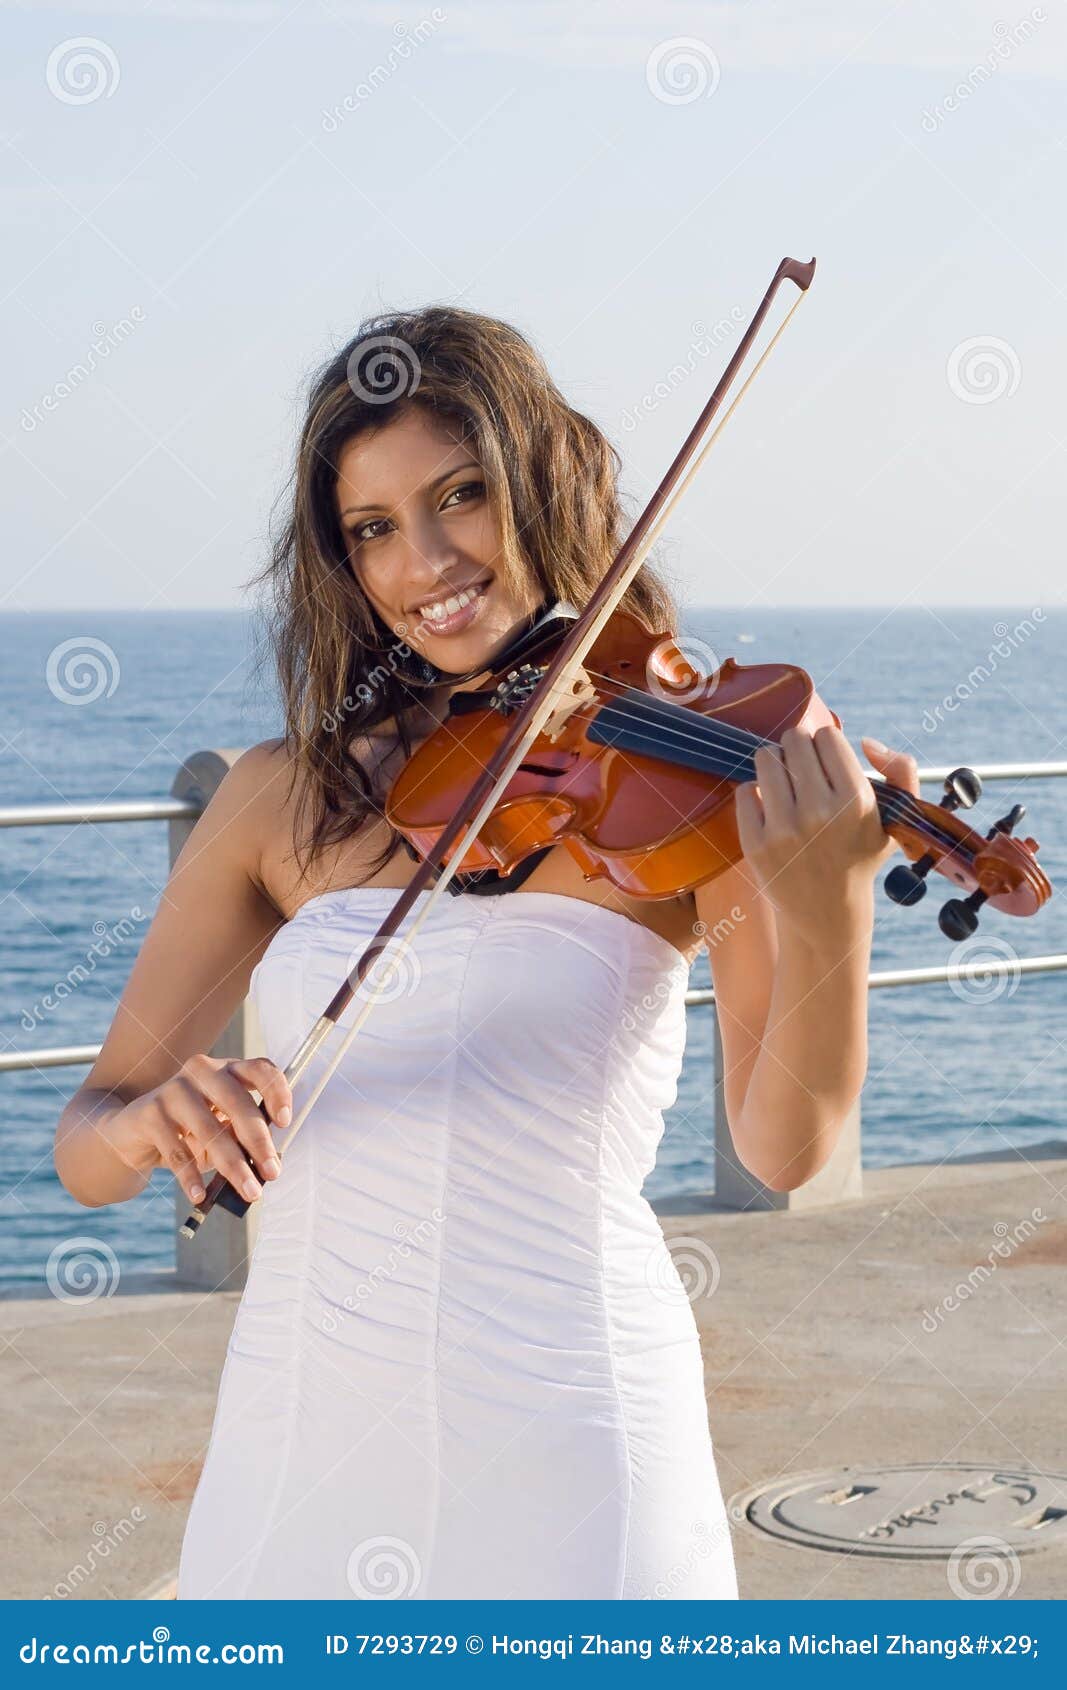 121 Asian Woman Play Music Instrument Standing Stock Photos - Free